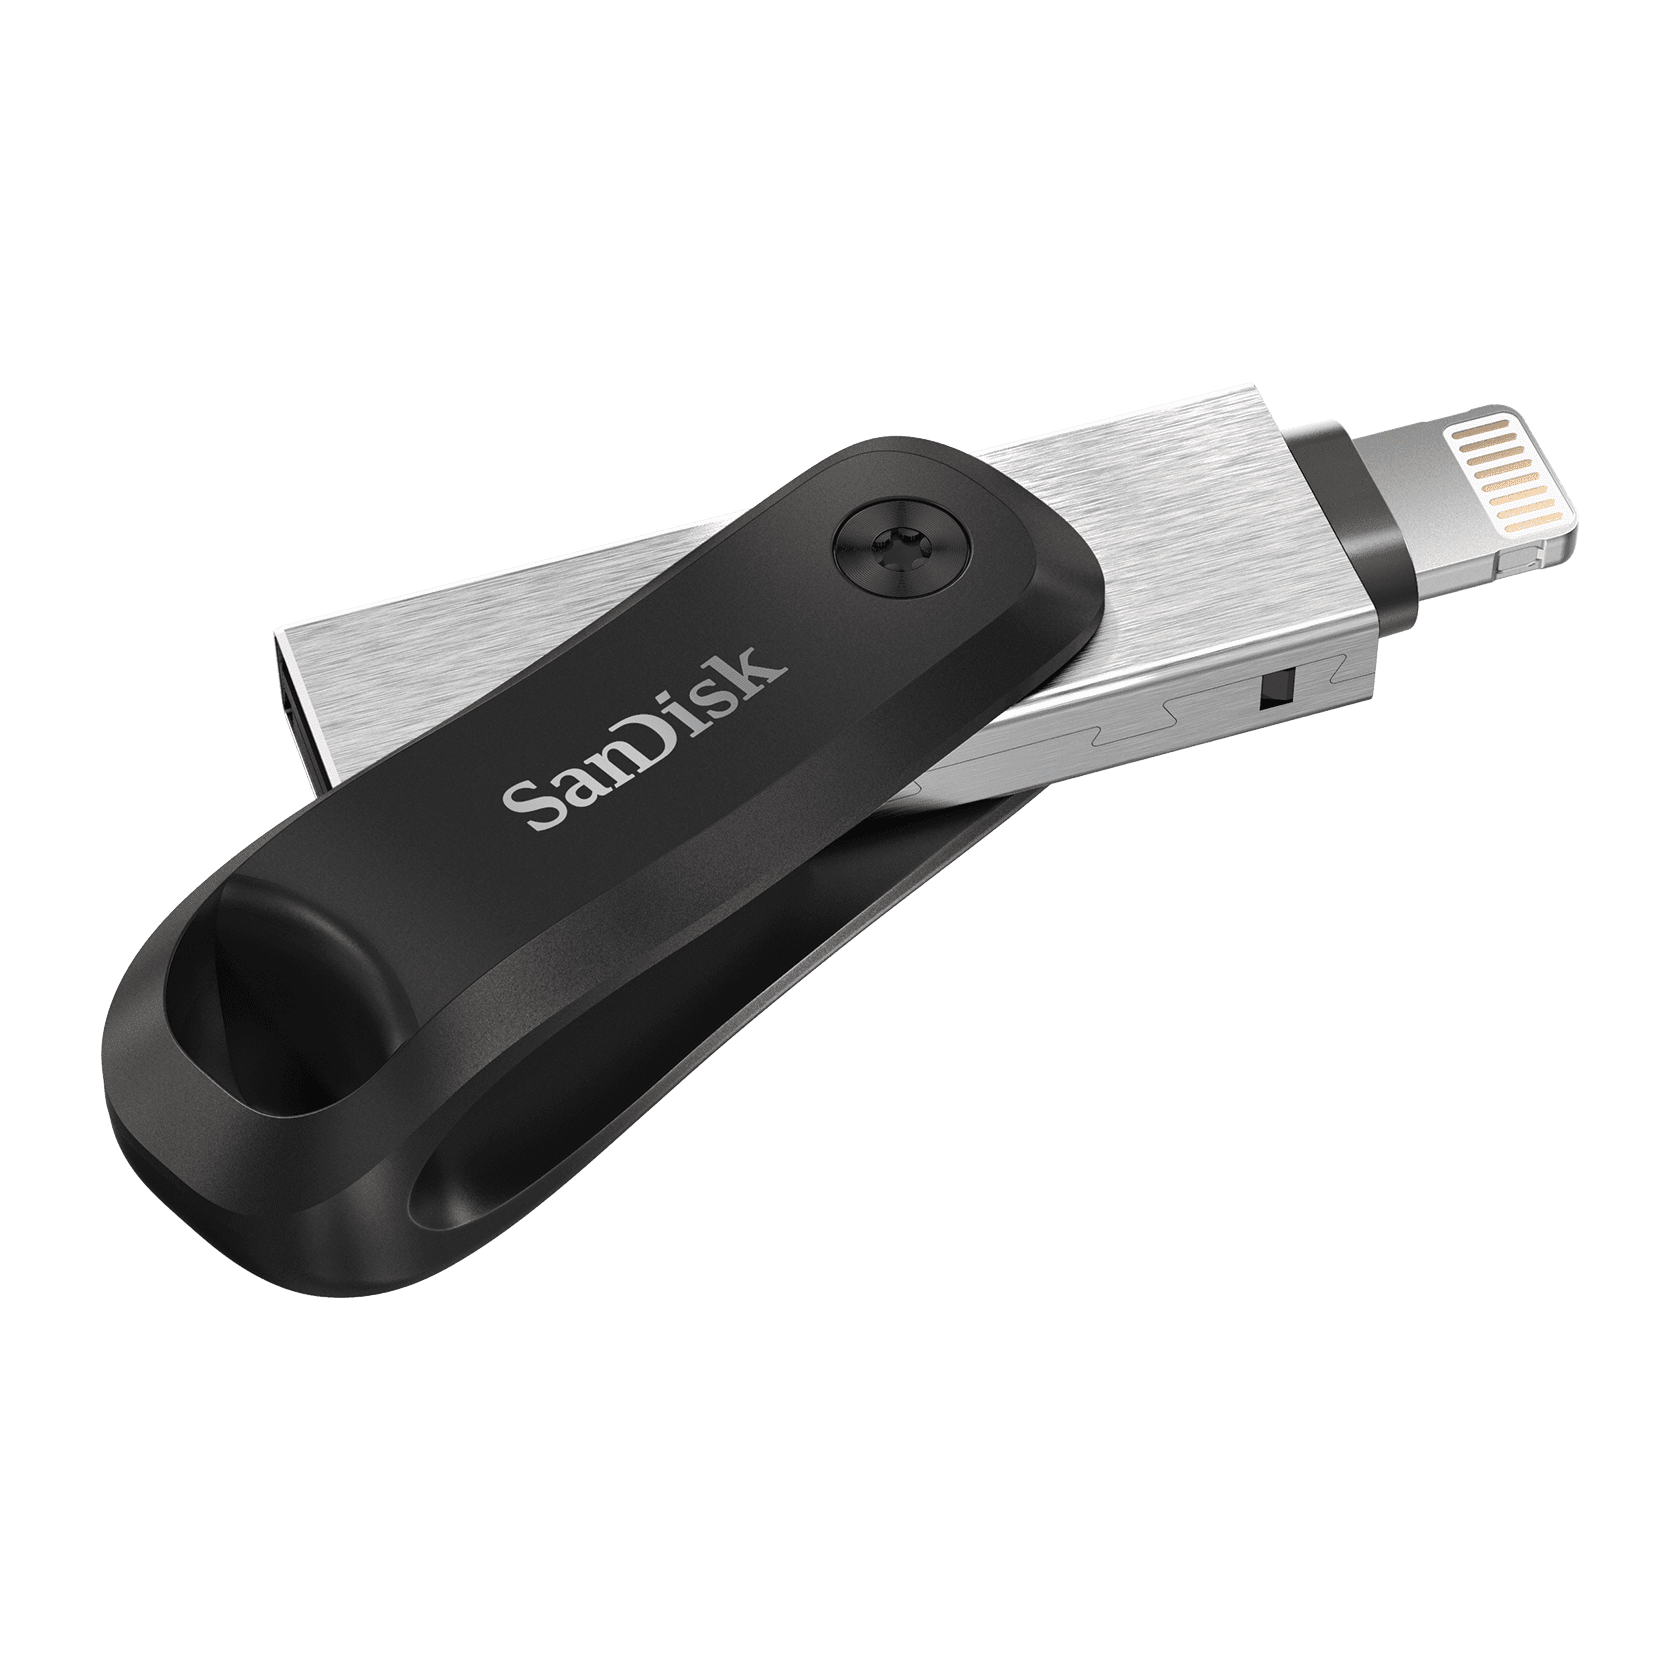 SanDisk 64GB iXpand Flash Drive Go, for iPhone and iPad - SDIX60N ...